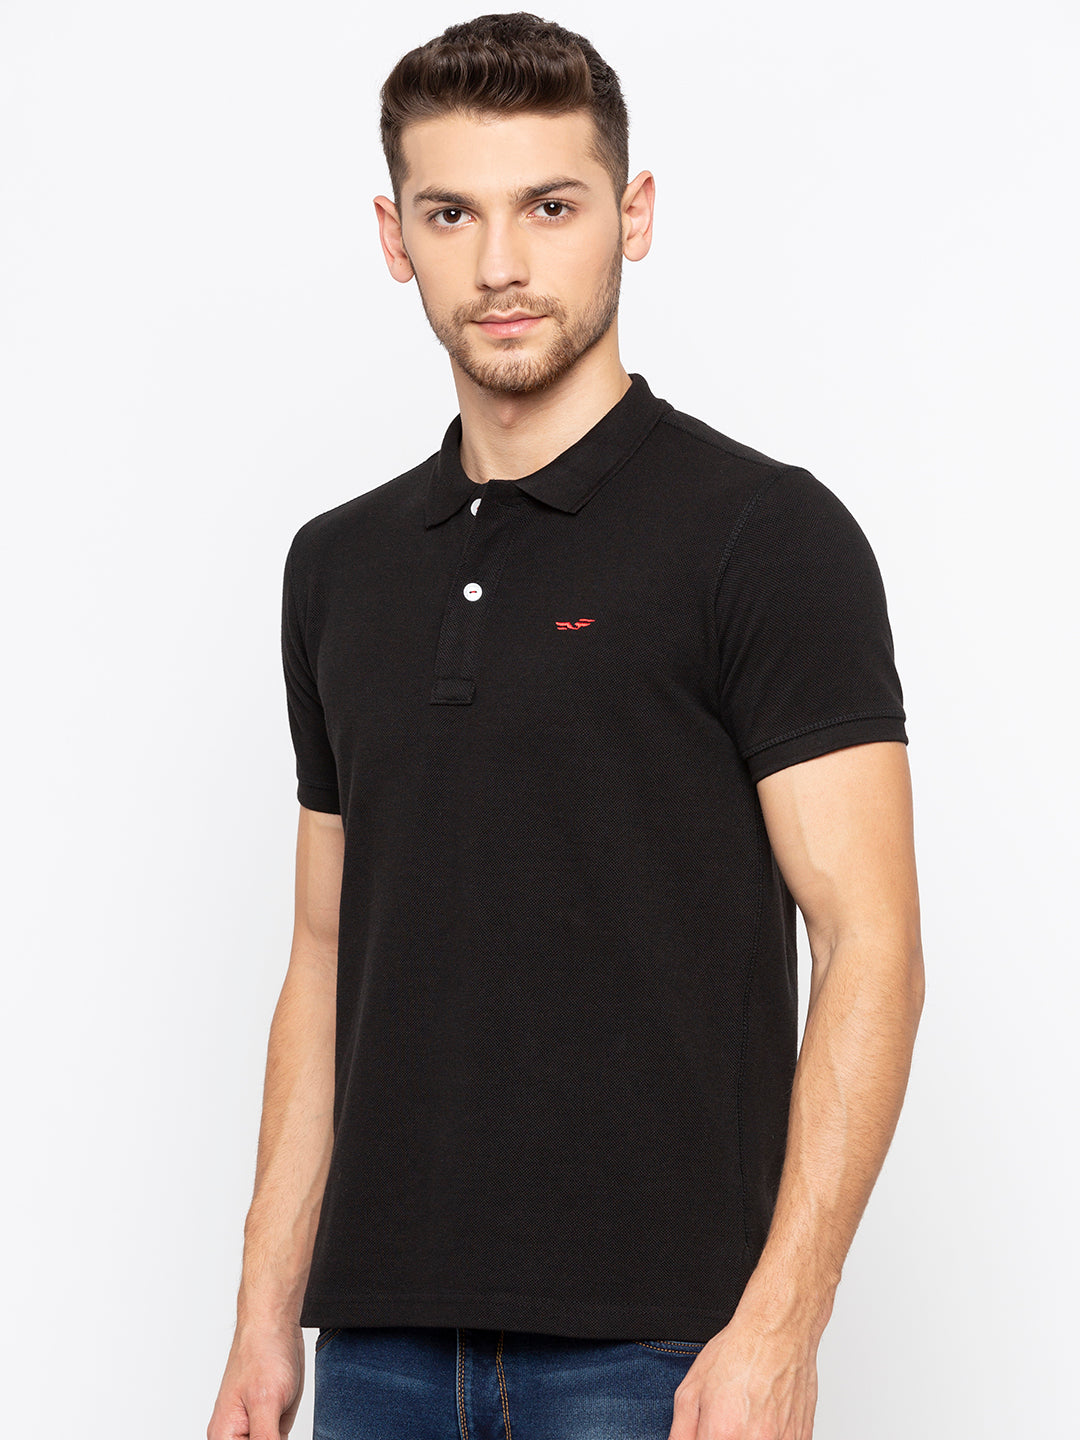 polo t shirts for men